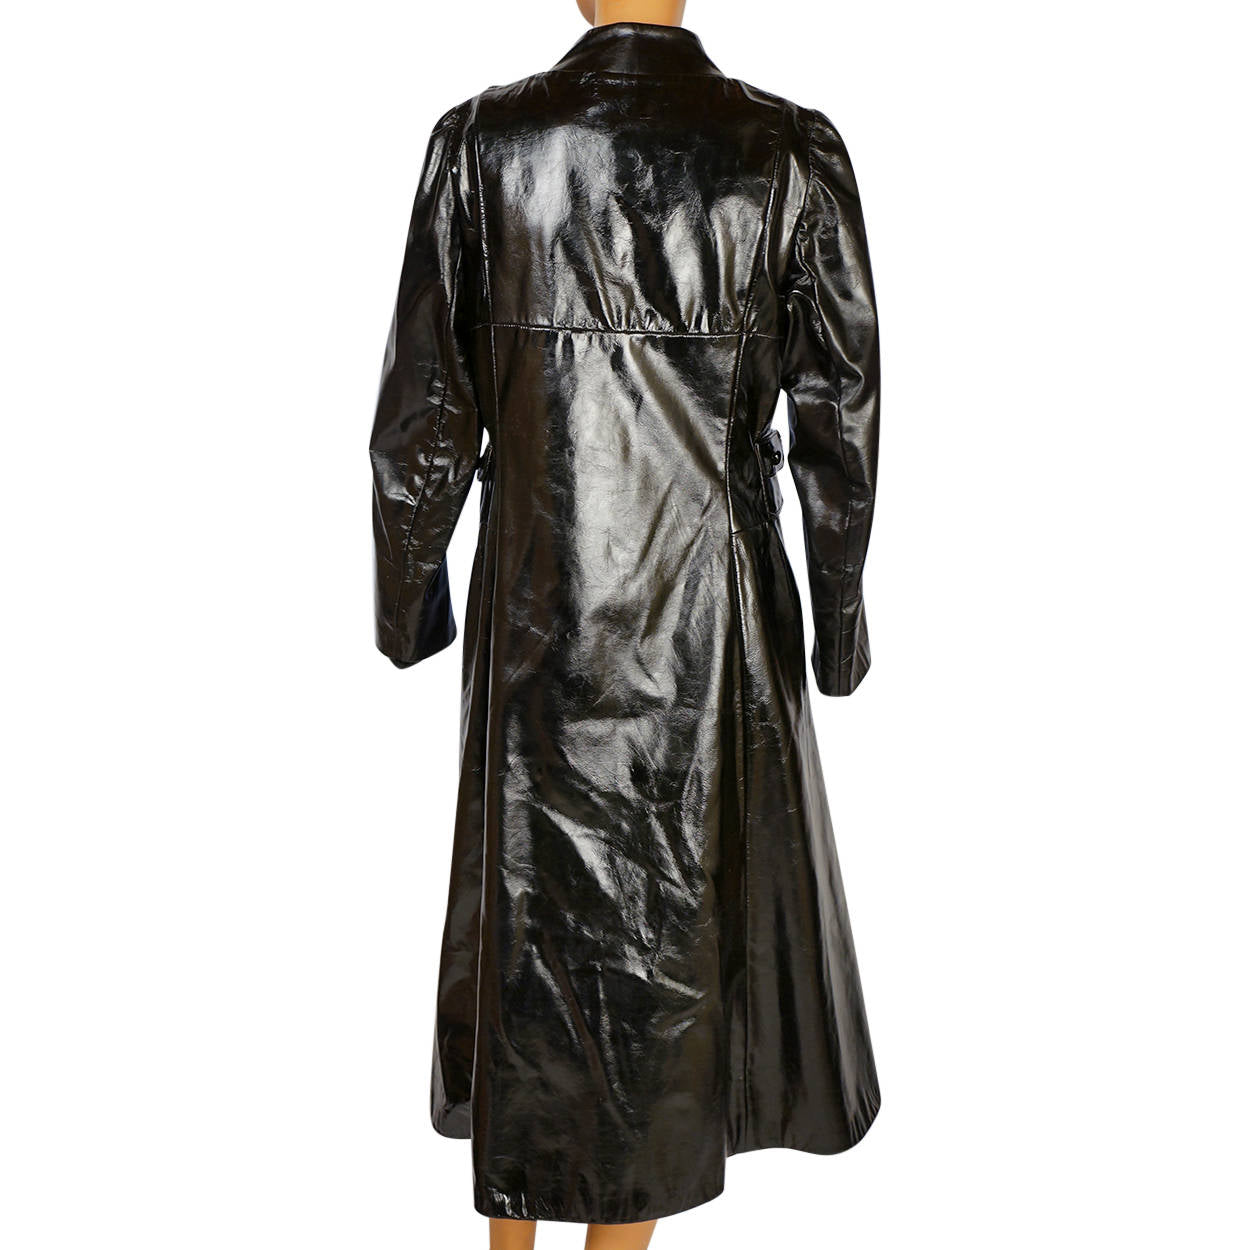 Vintage 1960s Mod Black Patent Leather Coat Holt Renfrew Made in Italy ...